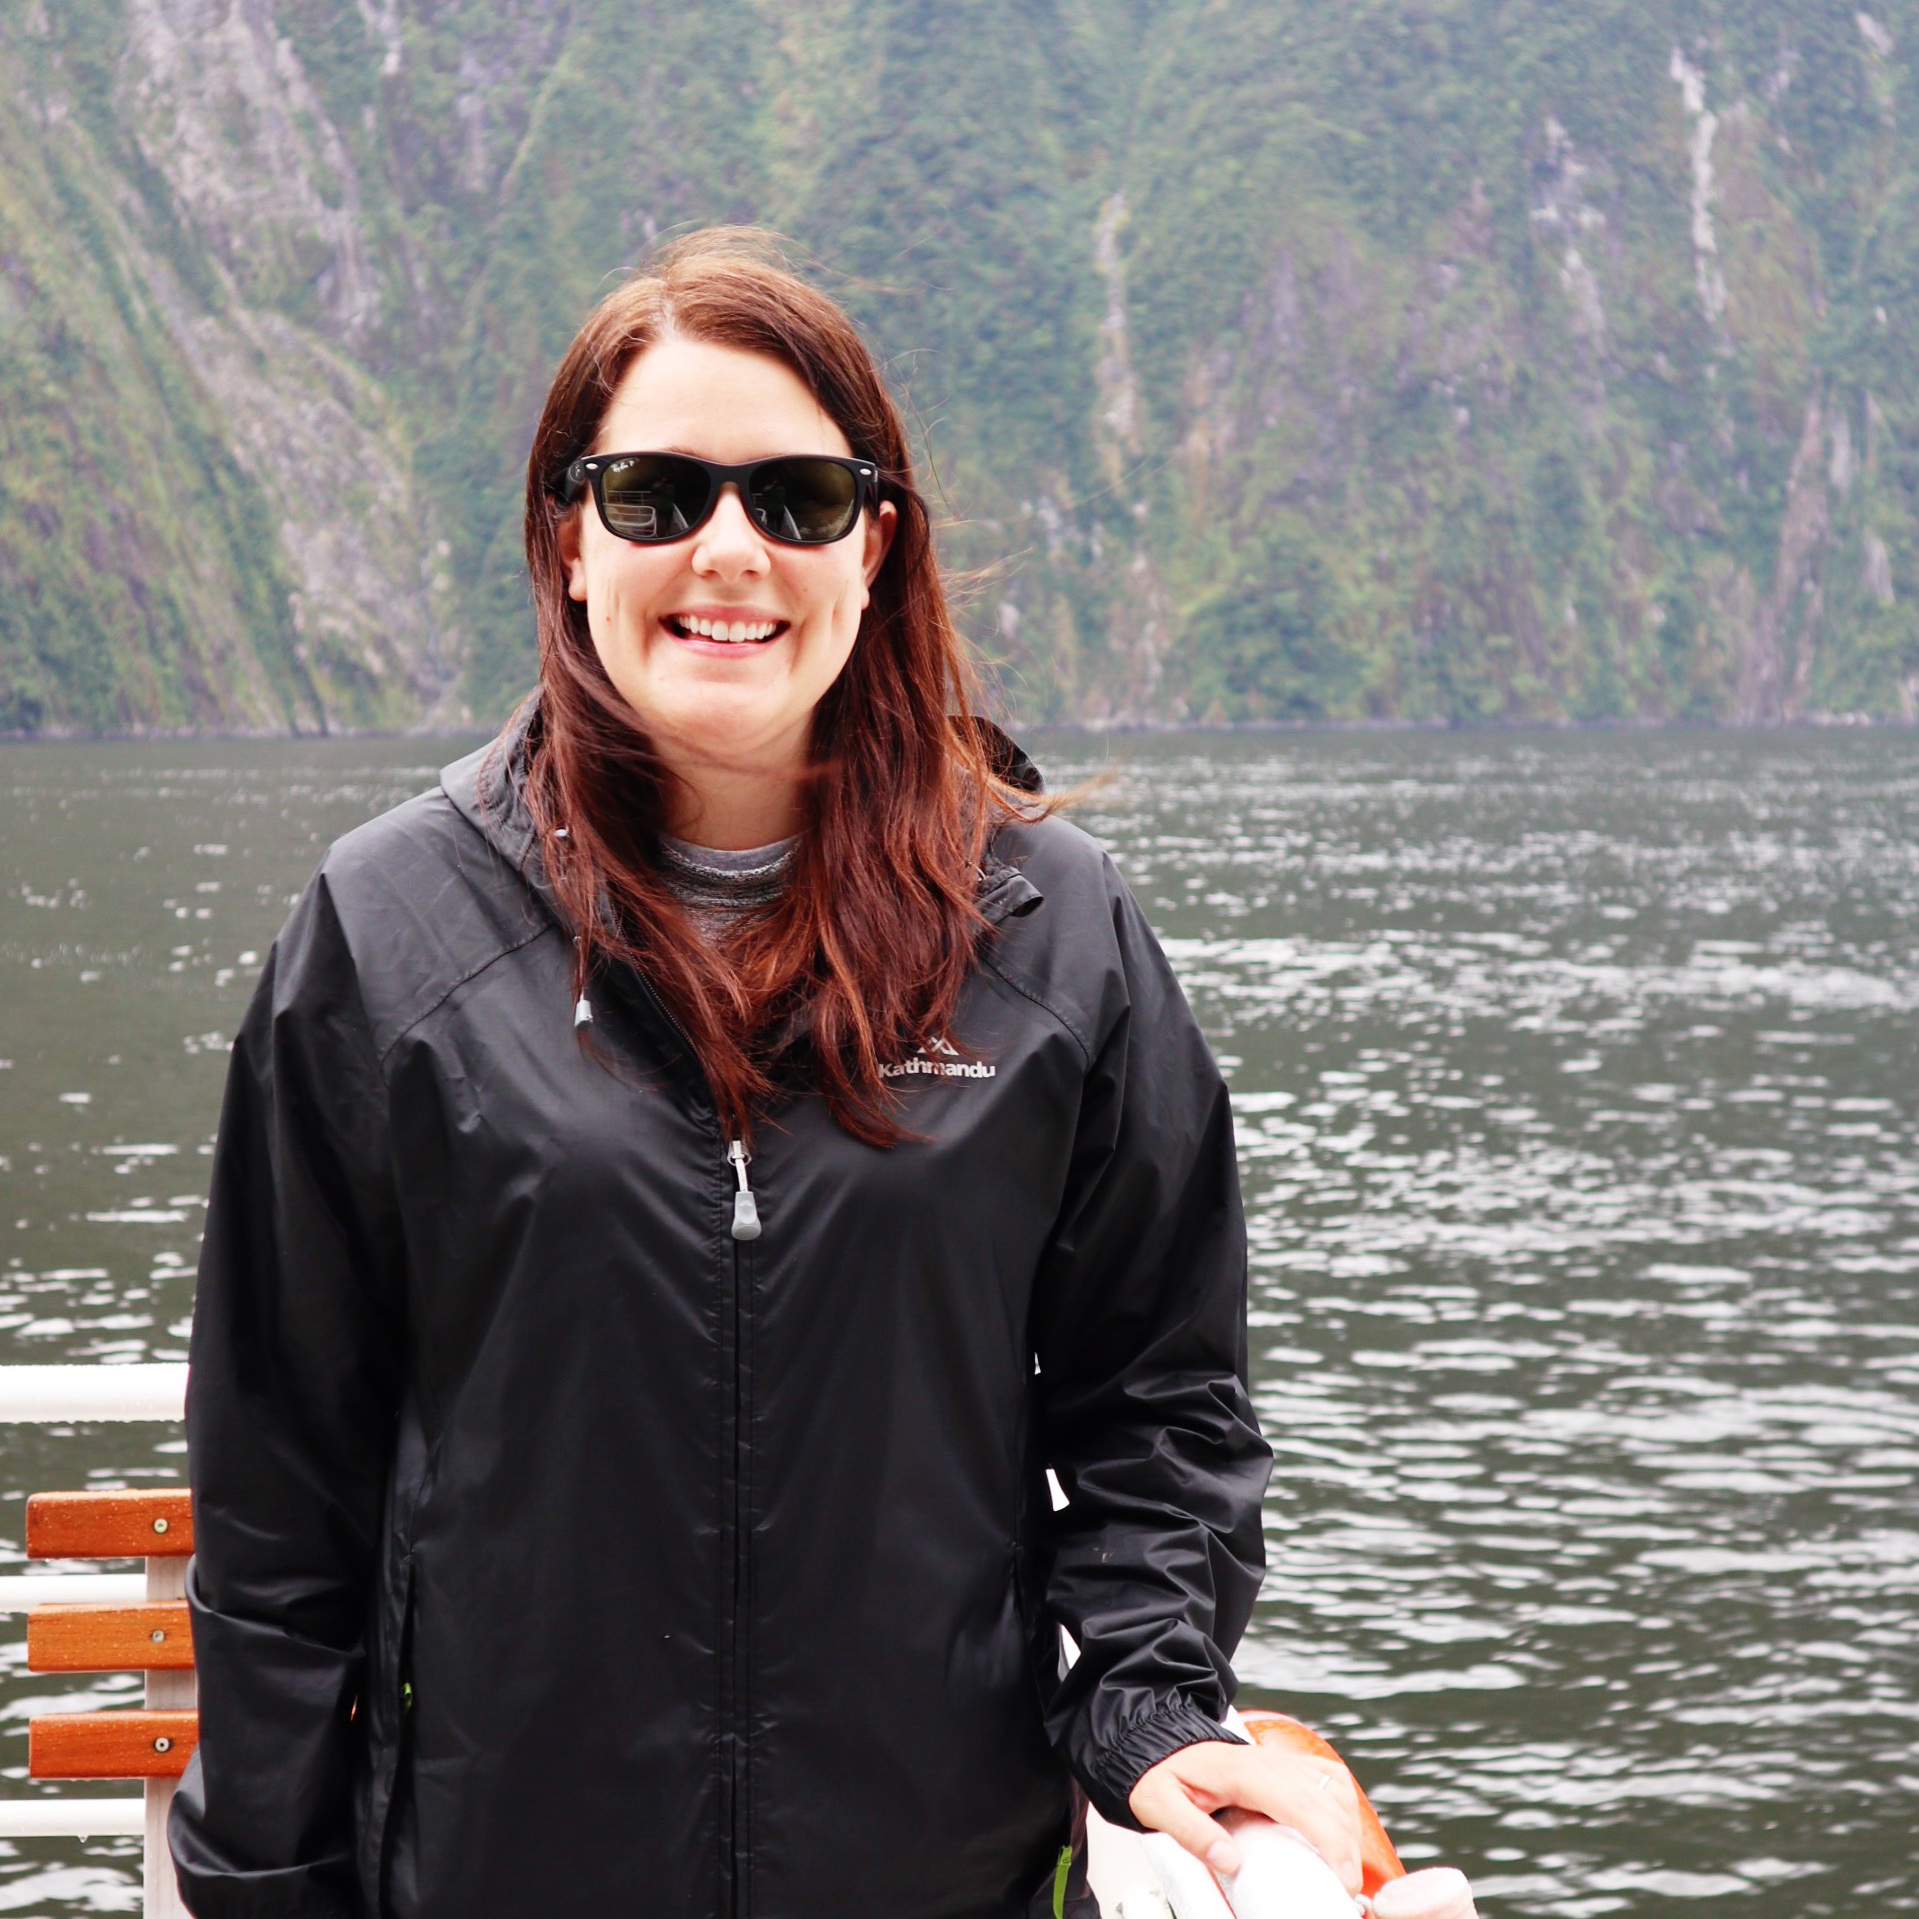 Jen wearing sunglasses and a black rain jacket smiles in front of a lake